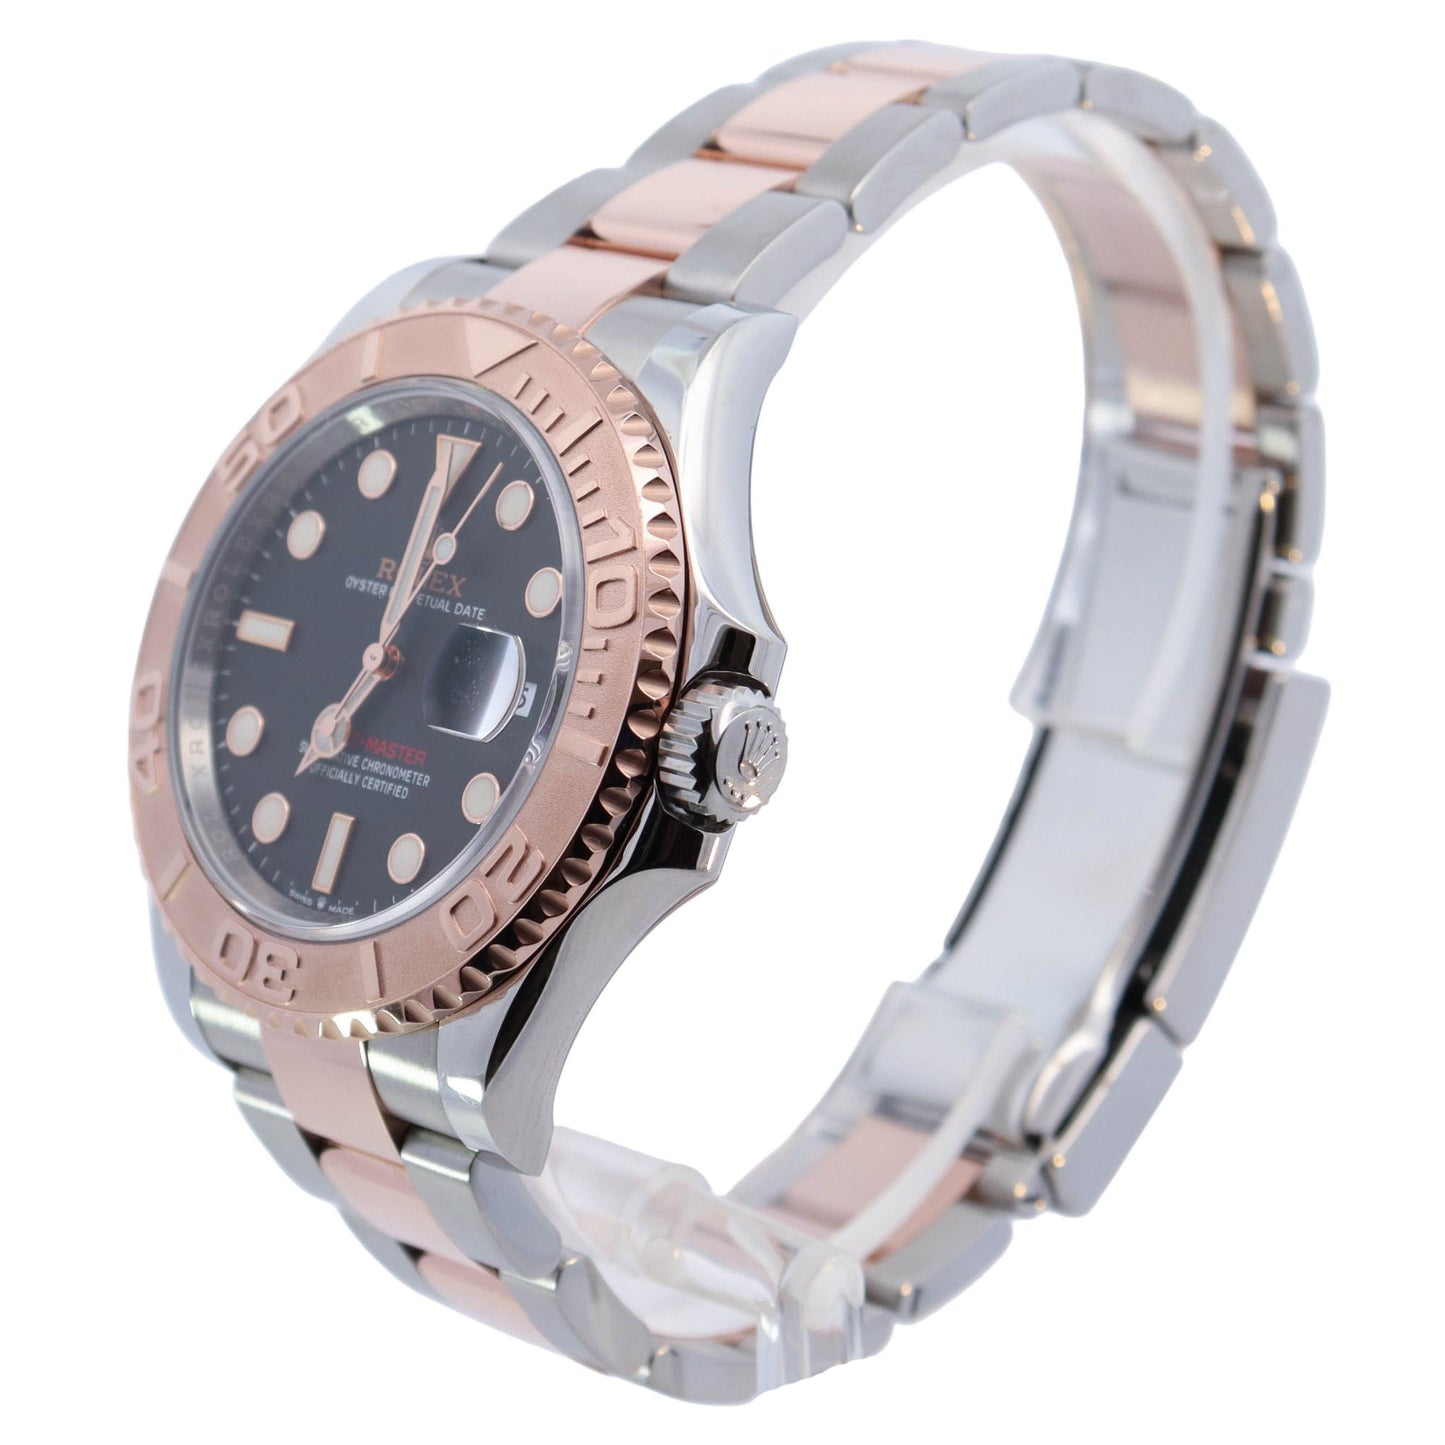 Rolex Yacht Master Two Tone Rose Gold 40mm Black Dot Dial Watch Reference# 126621 - Happy Jewelers Fine Jewelry Lifetime Warranty